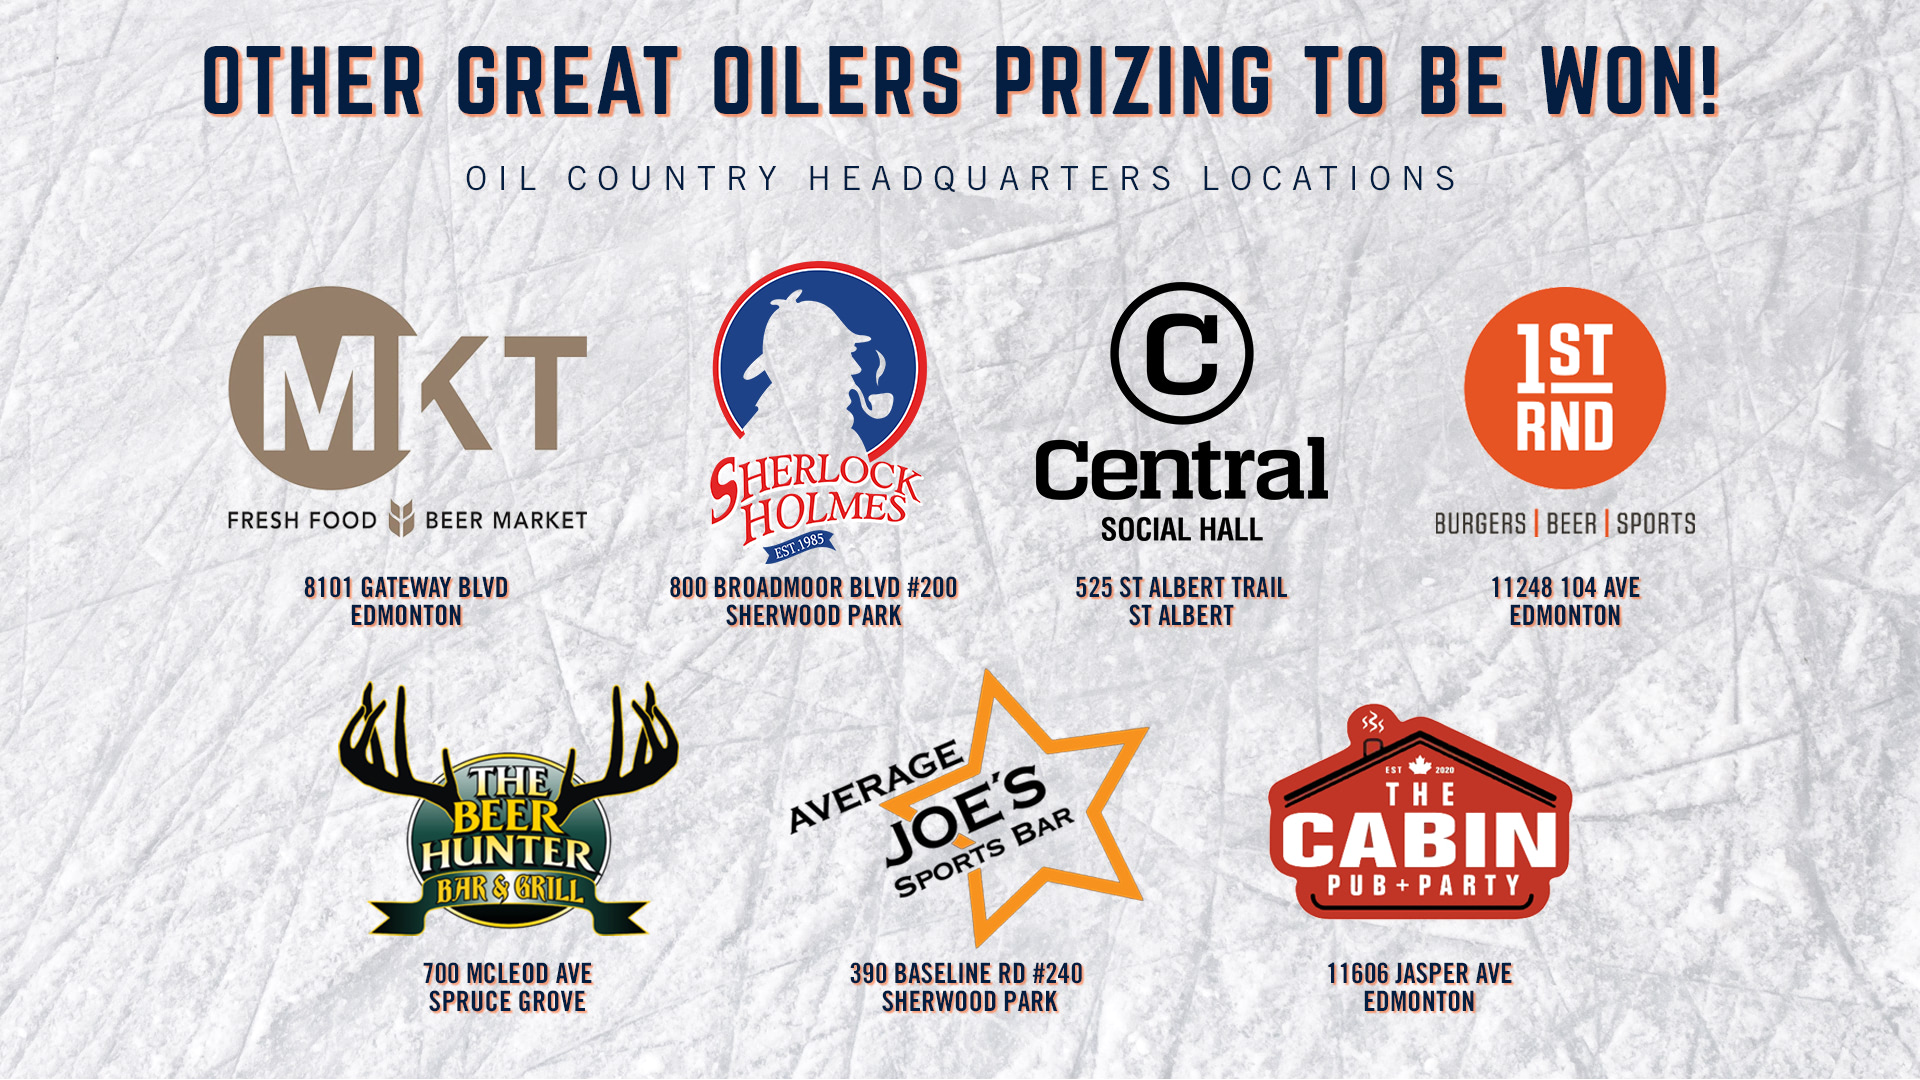 Other Great Oilers Prizing to be won! Oil Country Headquarters Locations: MKT - 8101 Gateway Blvd, Sherlock Holmes - 10012 101A Ave, Central Social Hall - 10909 Jasper Ave, 1ST RND - 11248 1-4 Ave, The Beer Hunter Bar & Grill - 700 McLeod Ave Spruce Grove, Average Joe's Sports Bar - 390 Baseline RD #240 Sherwood Park, The Cabin Pub+Party - 11606 Jasper Ave